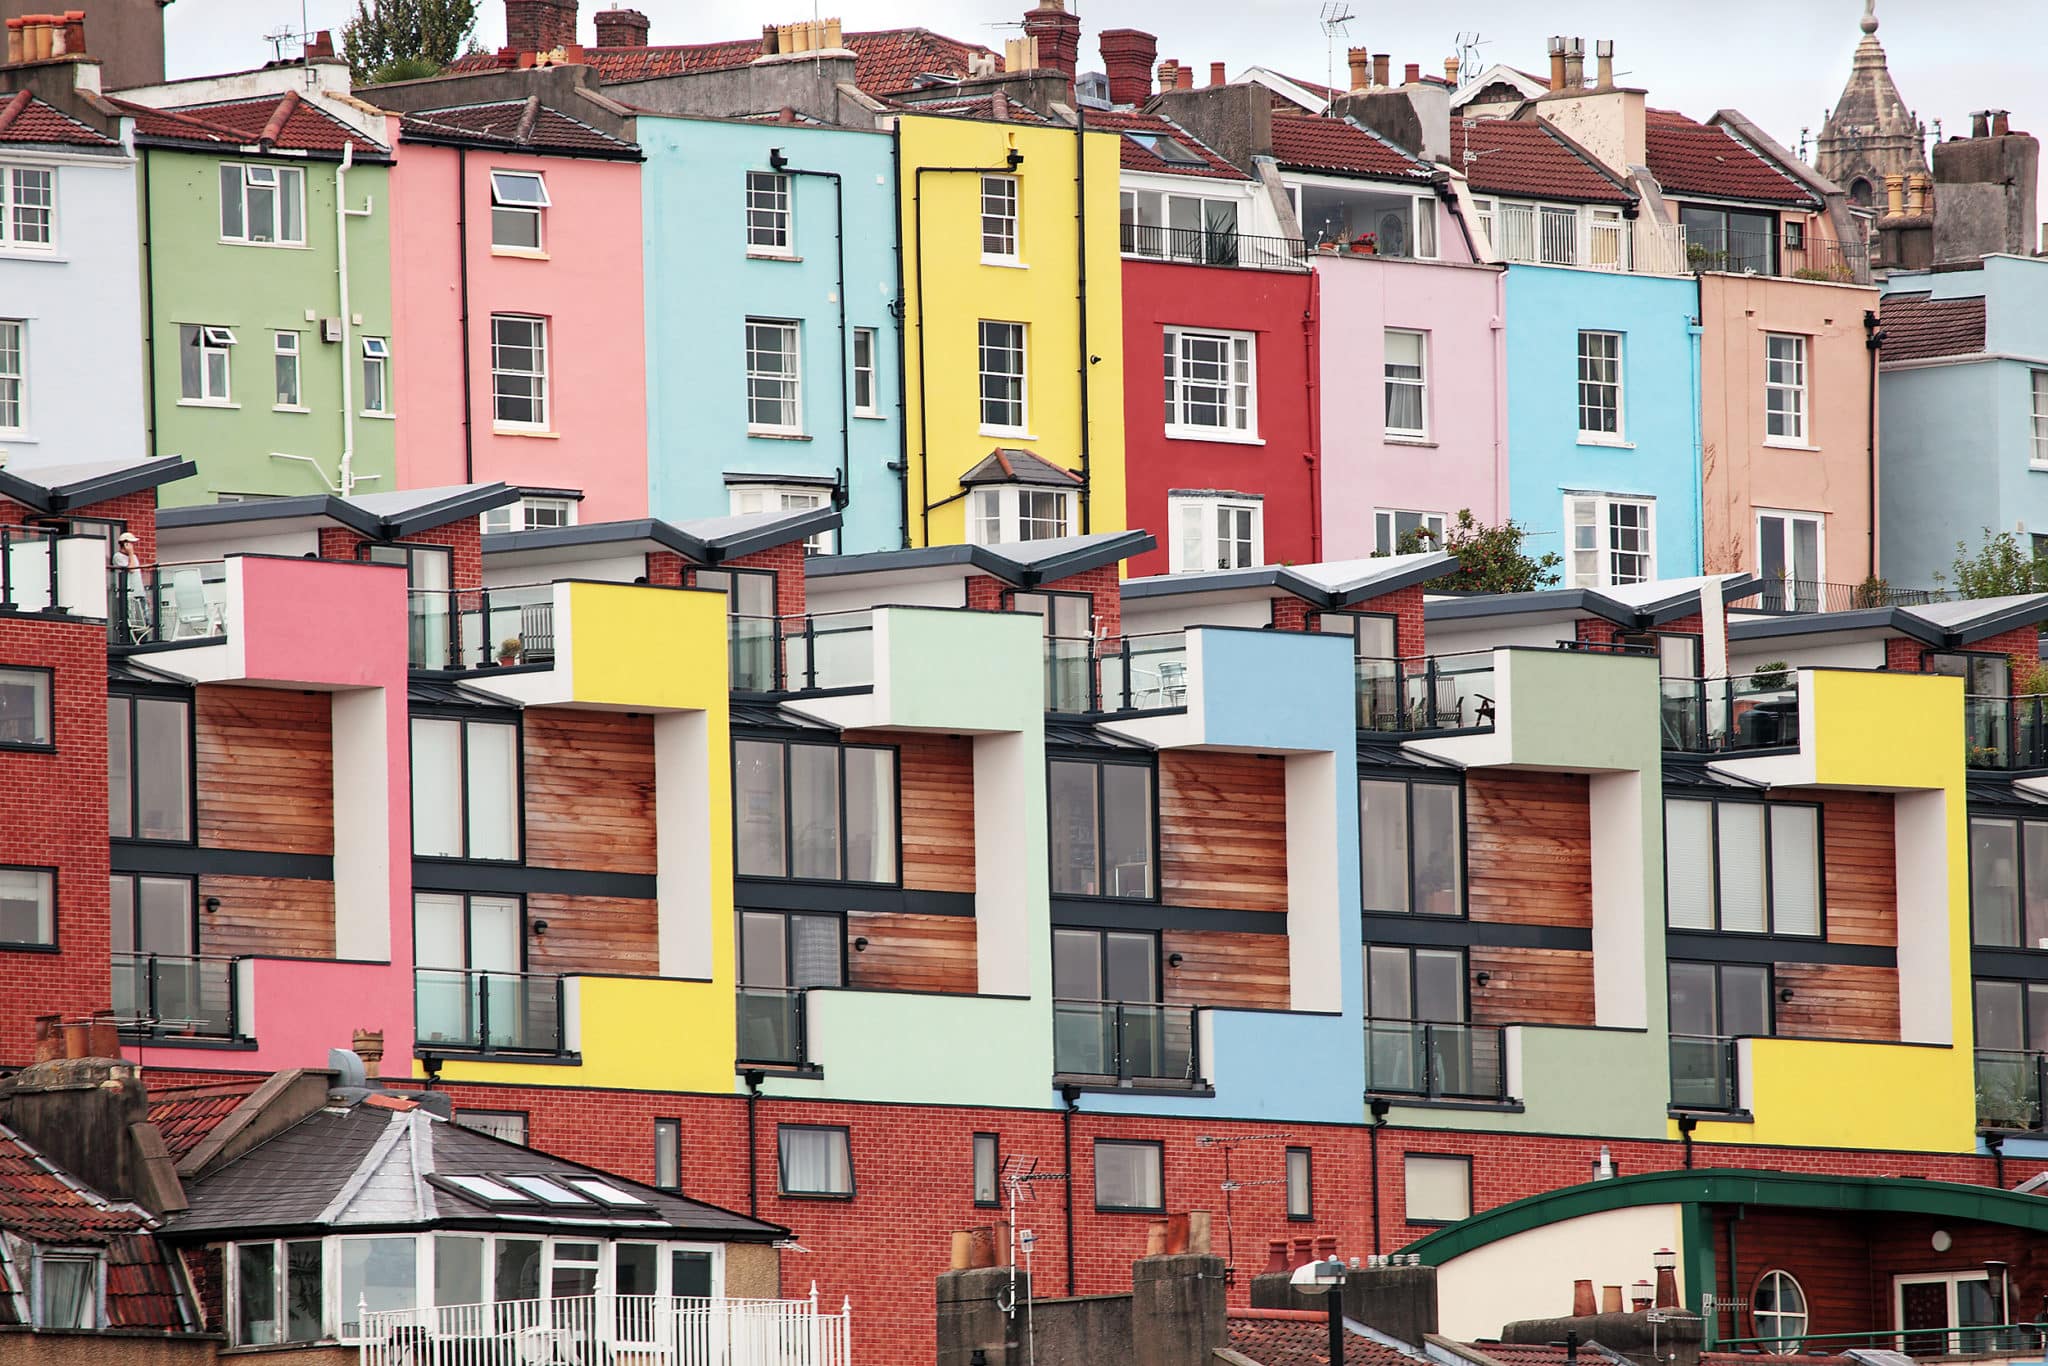 Quirky Bristol. Modern houses with Georgian colourful houses behind